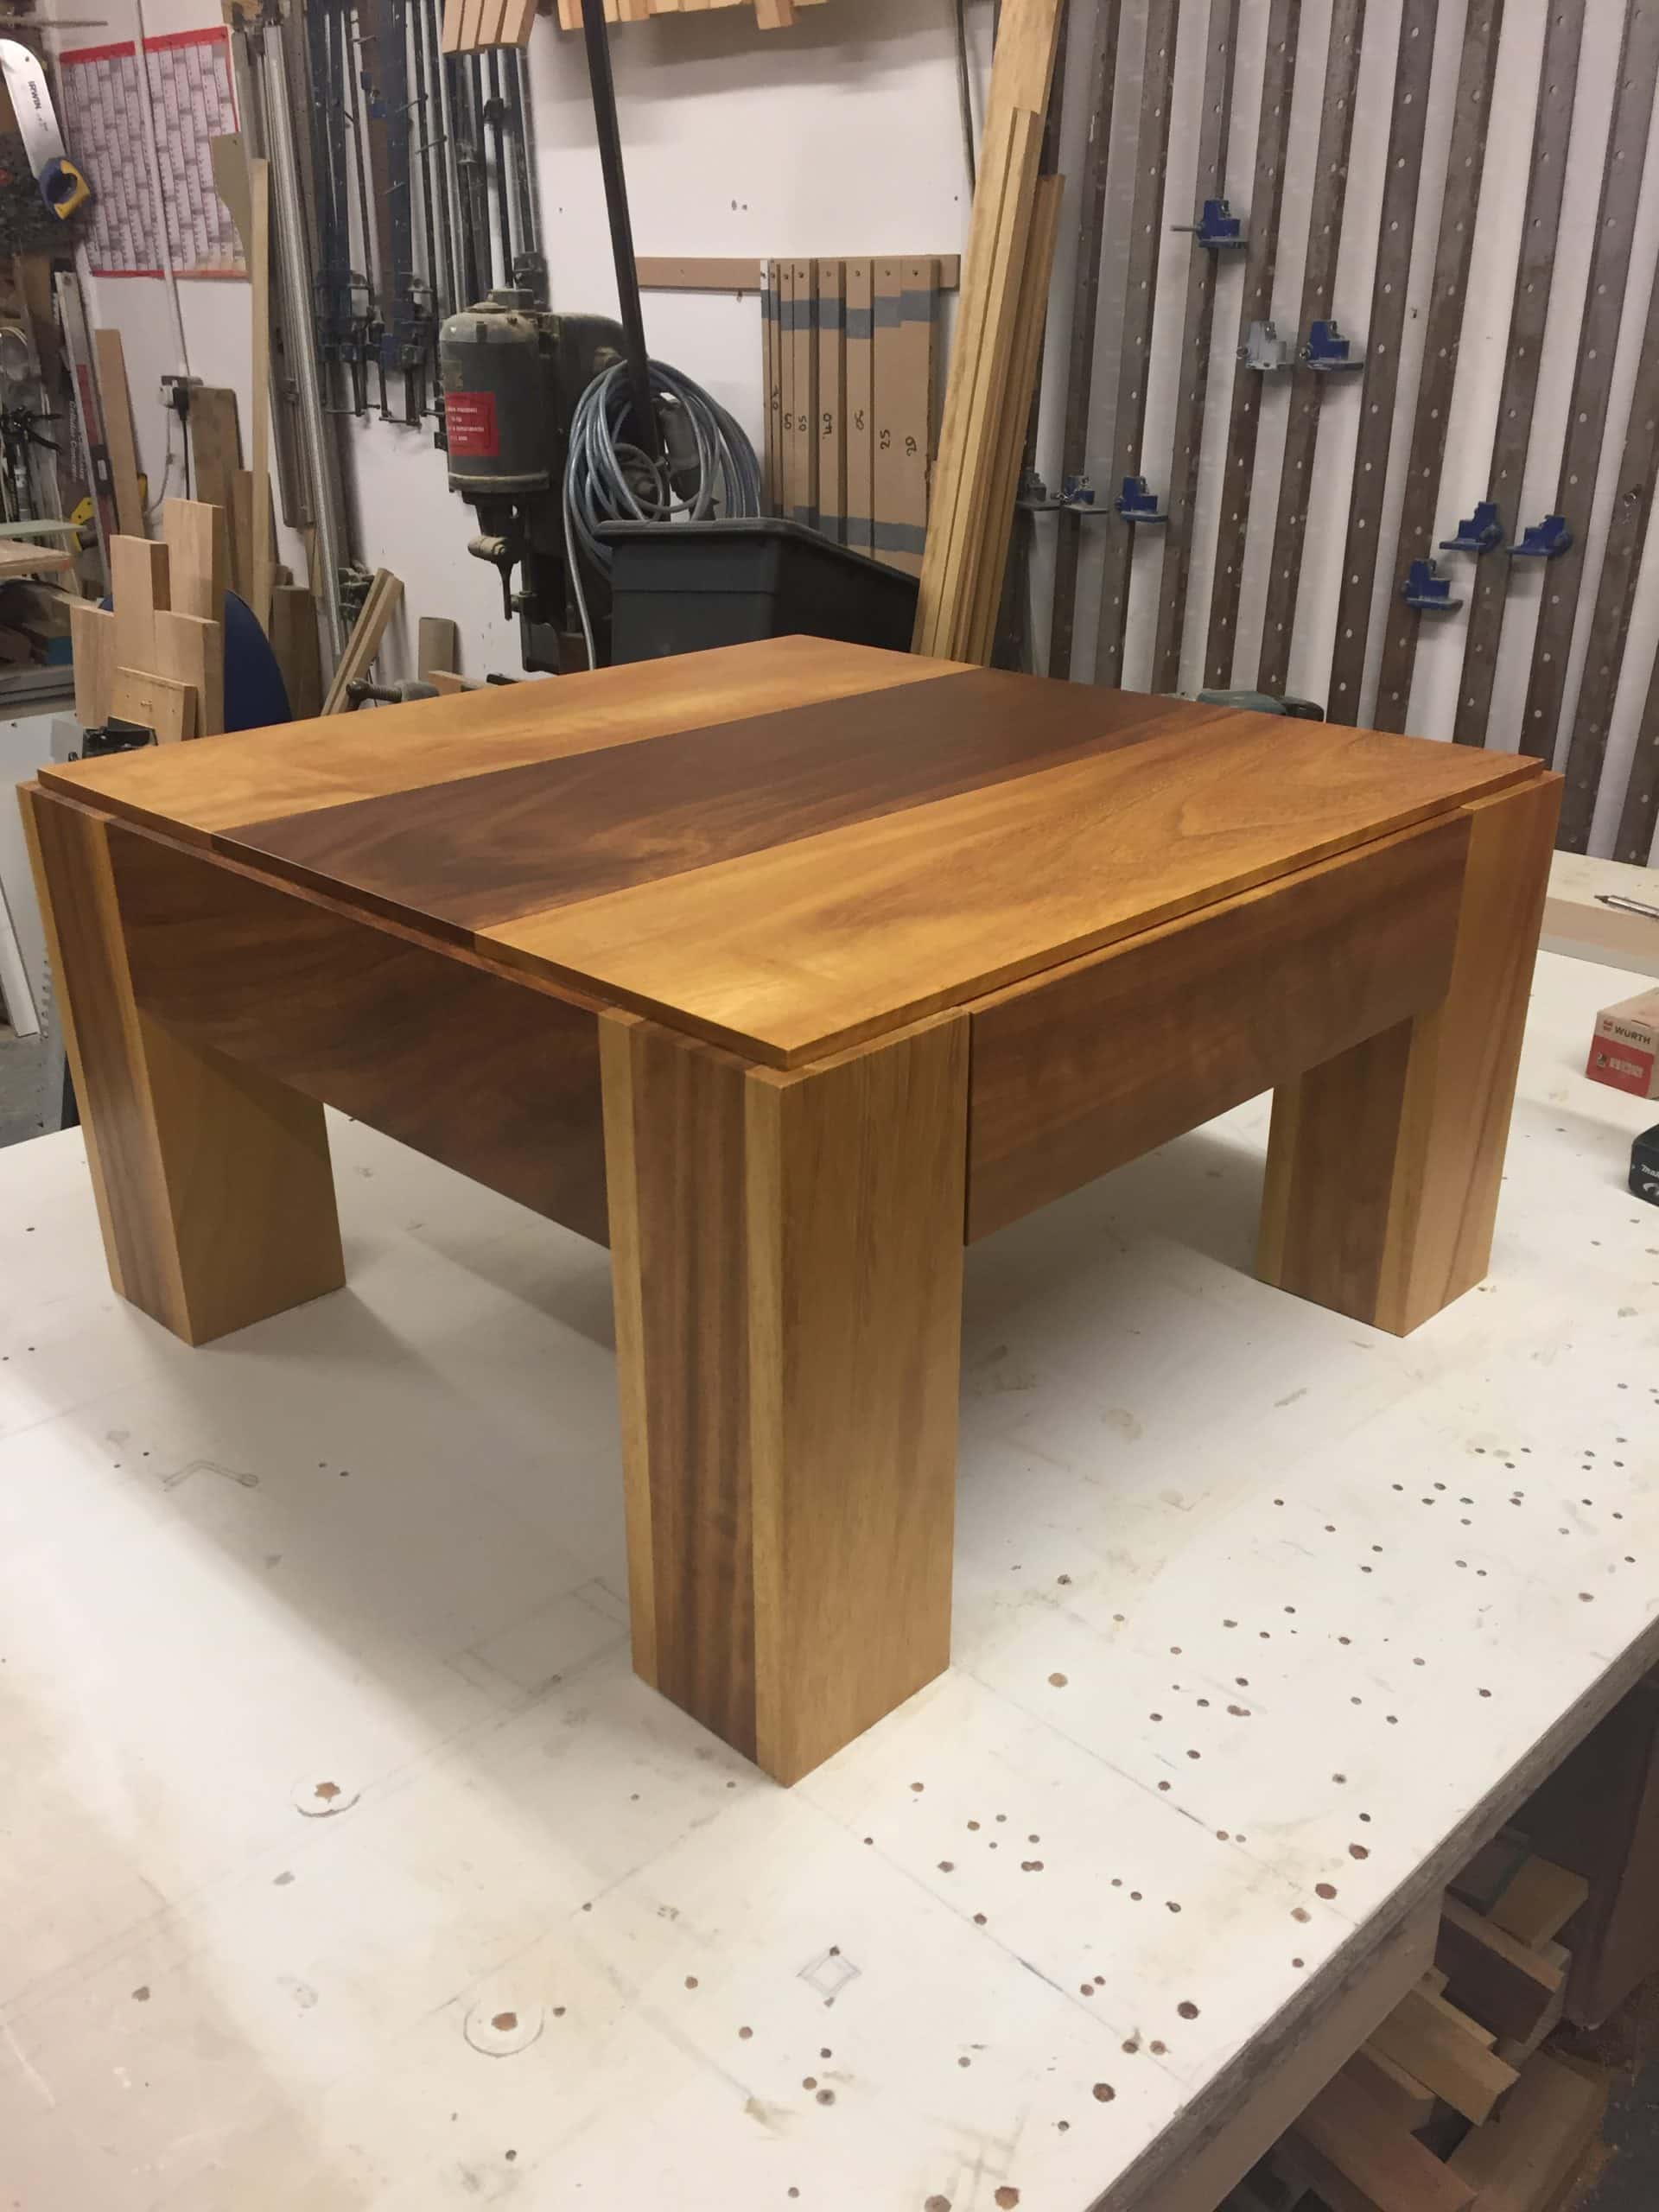 A bespoke coffee table with built in storage underneath